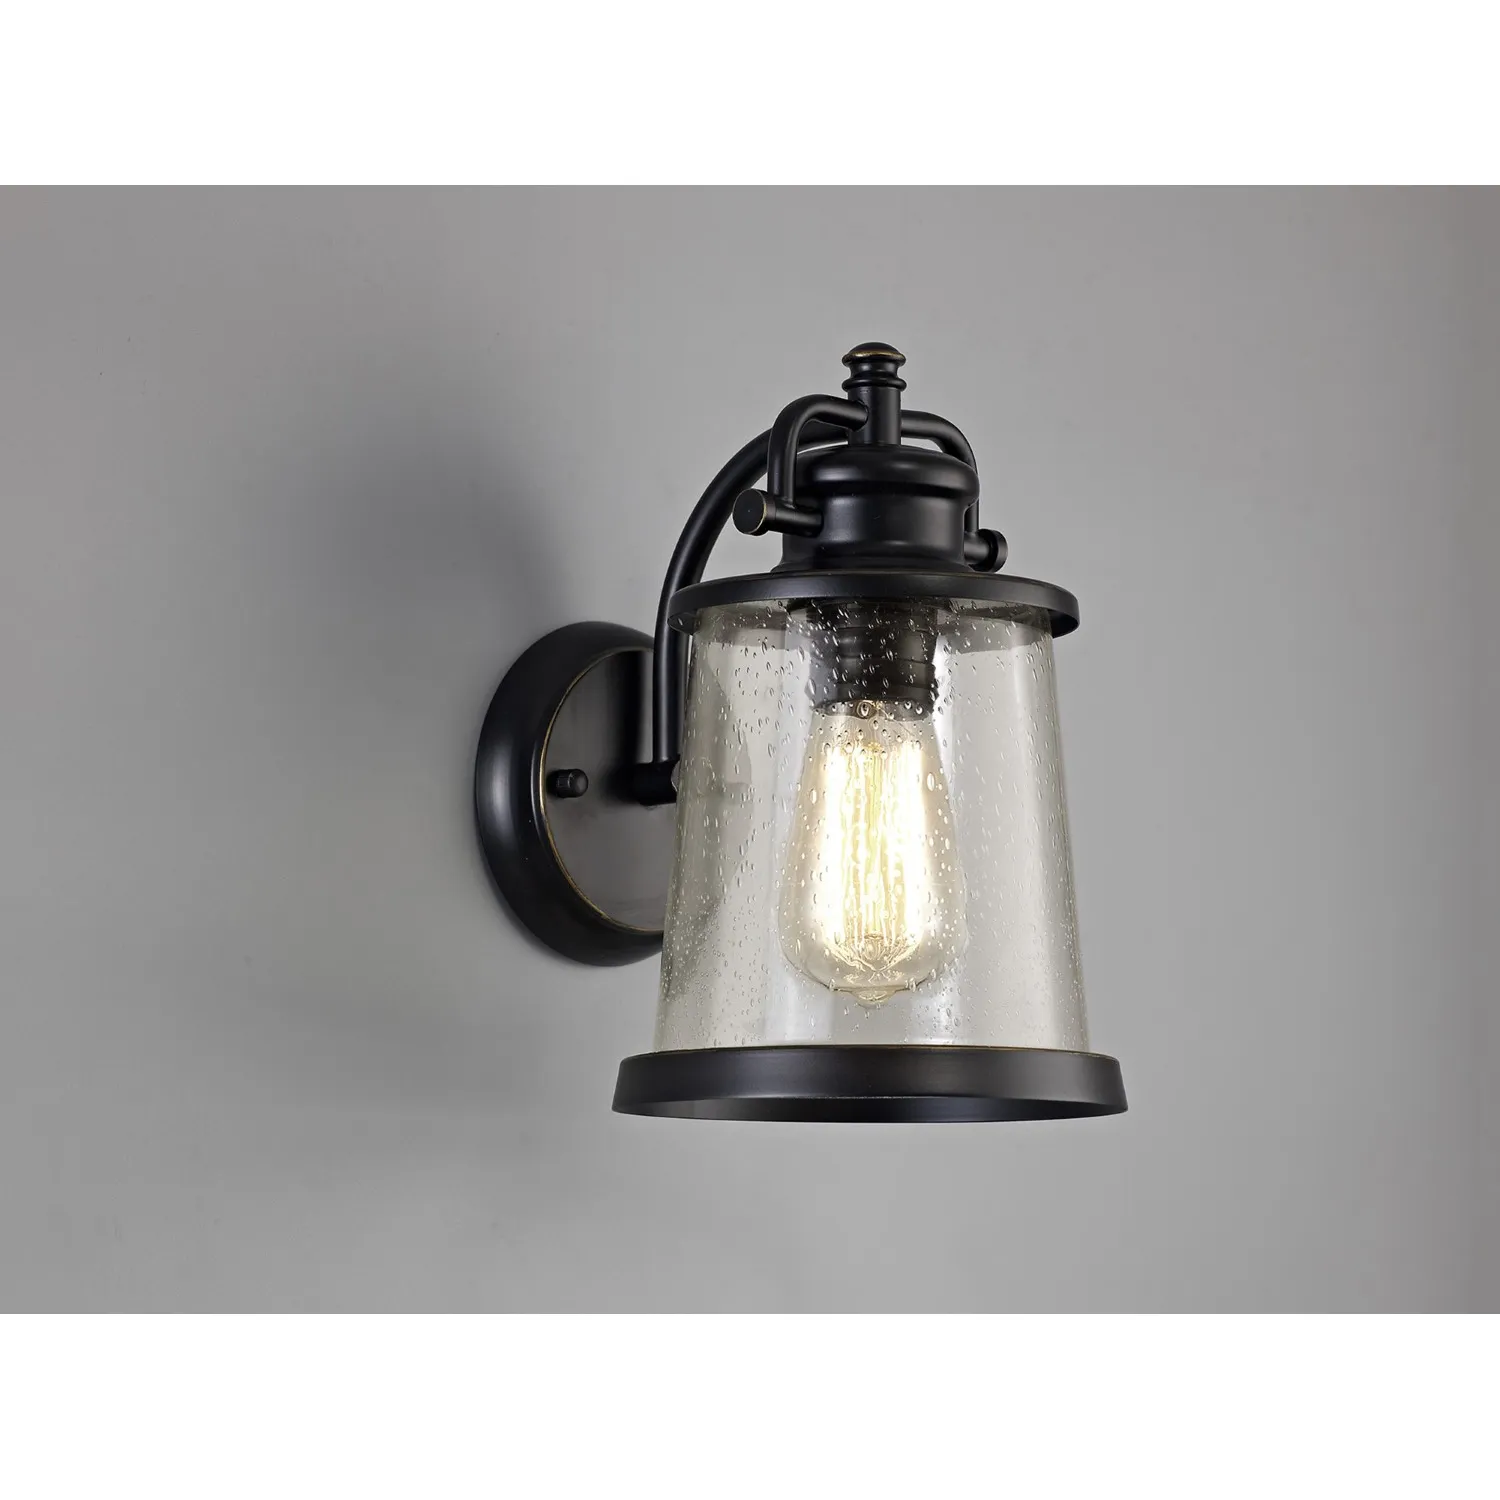 Wandsworth Wall Lamp, 1 x E27, Black Gold With Seeded Clear Glass, IP54, 2yrs Warranty